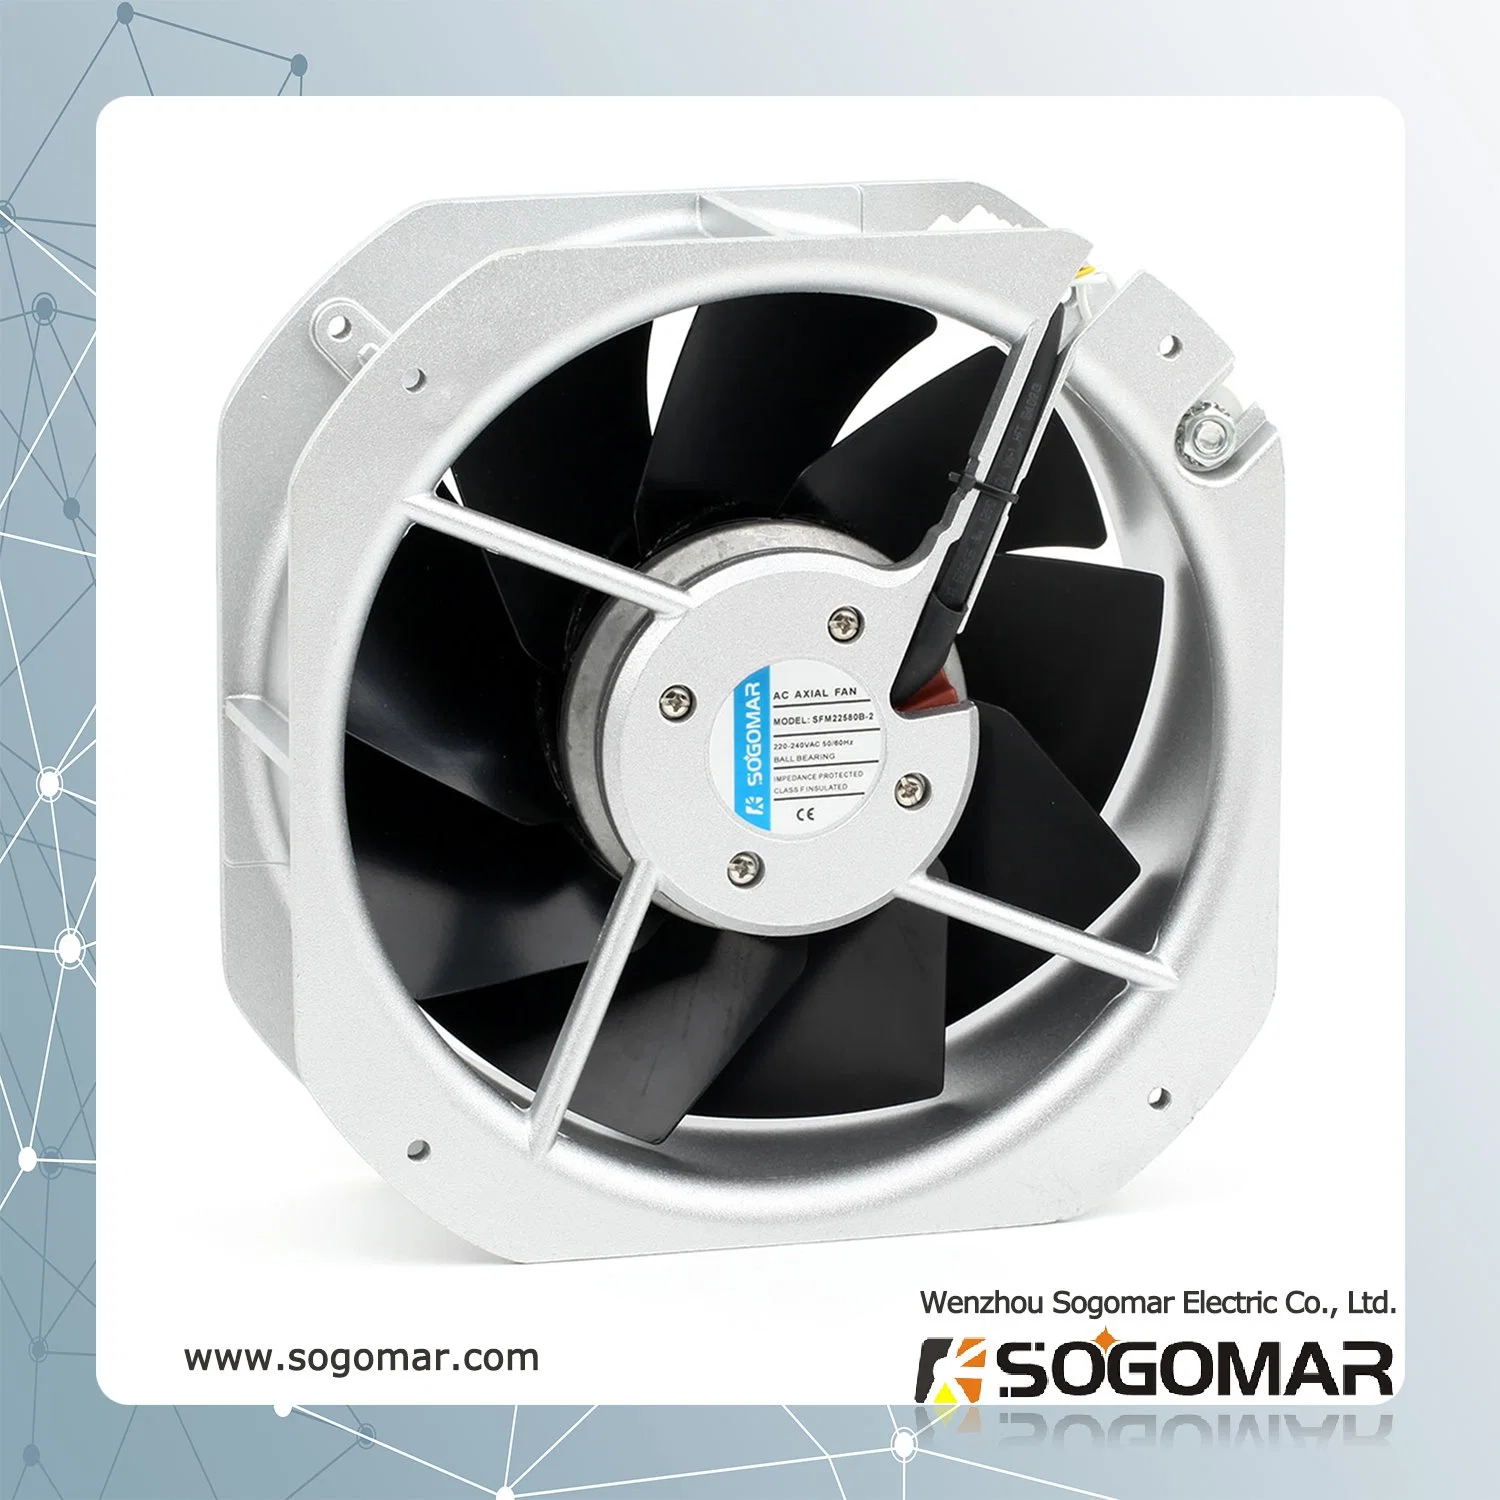 225X225X80mm Axial Fan 220VAC with Metal Impellers for Cooling